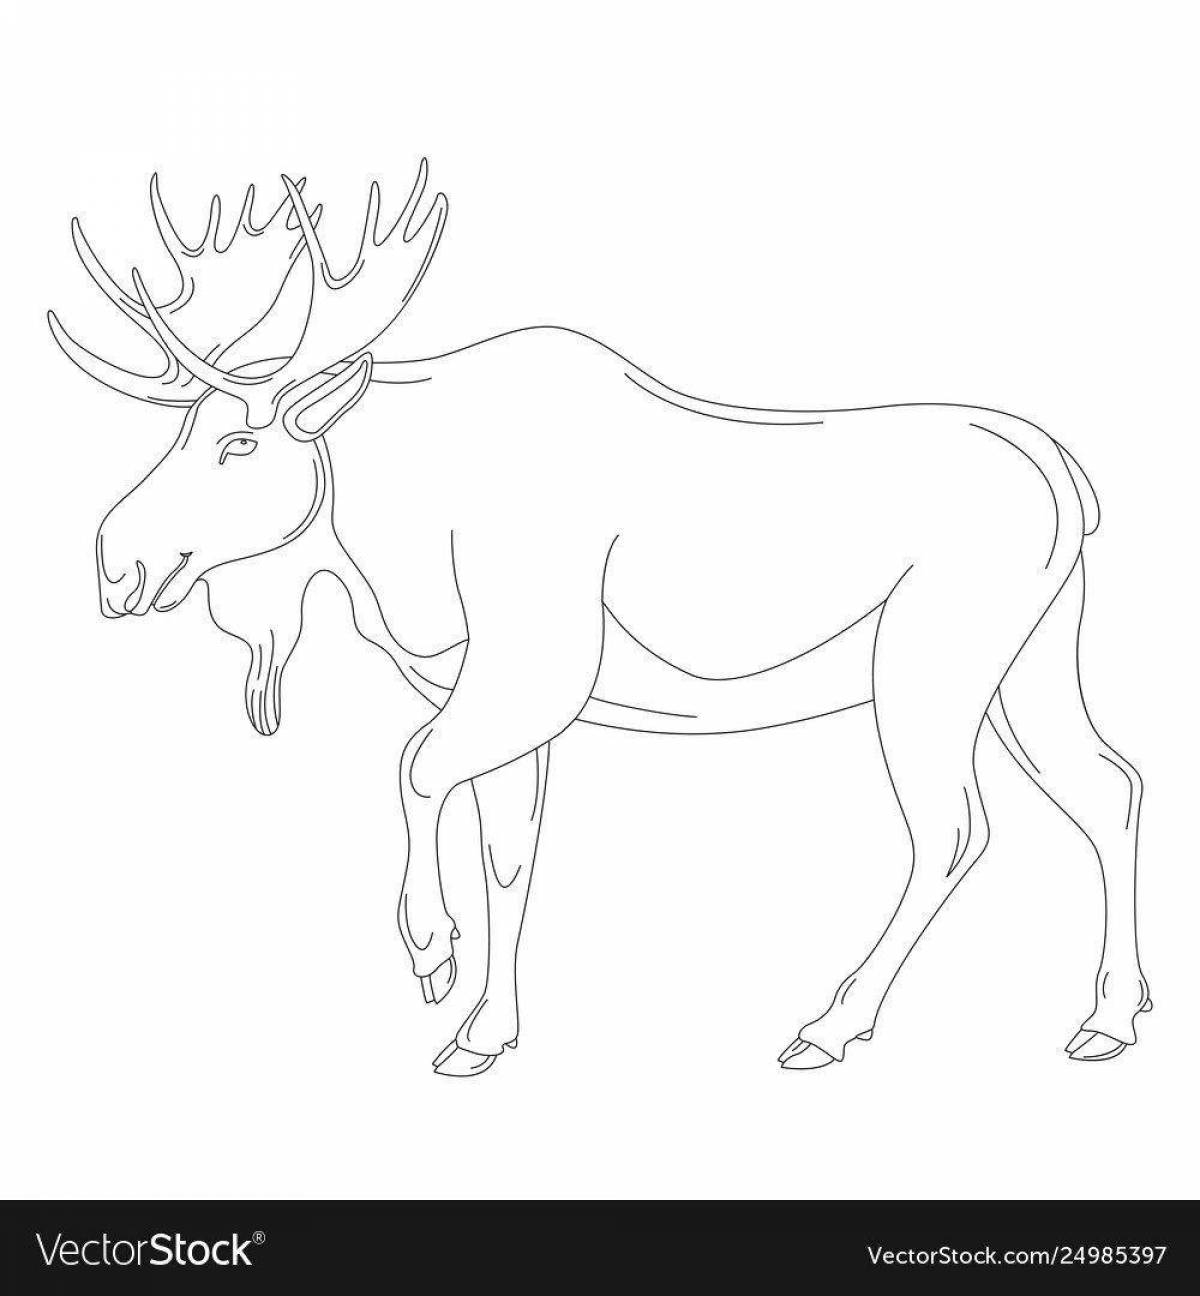 Coloring book dazzling elk for children 6-7 years old